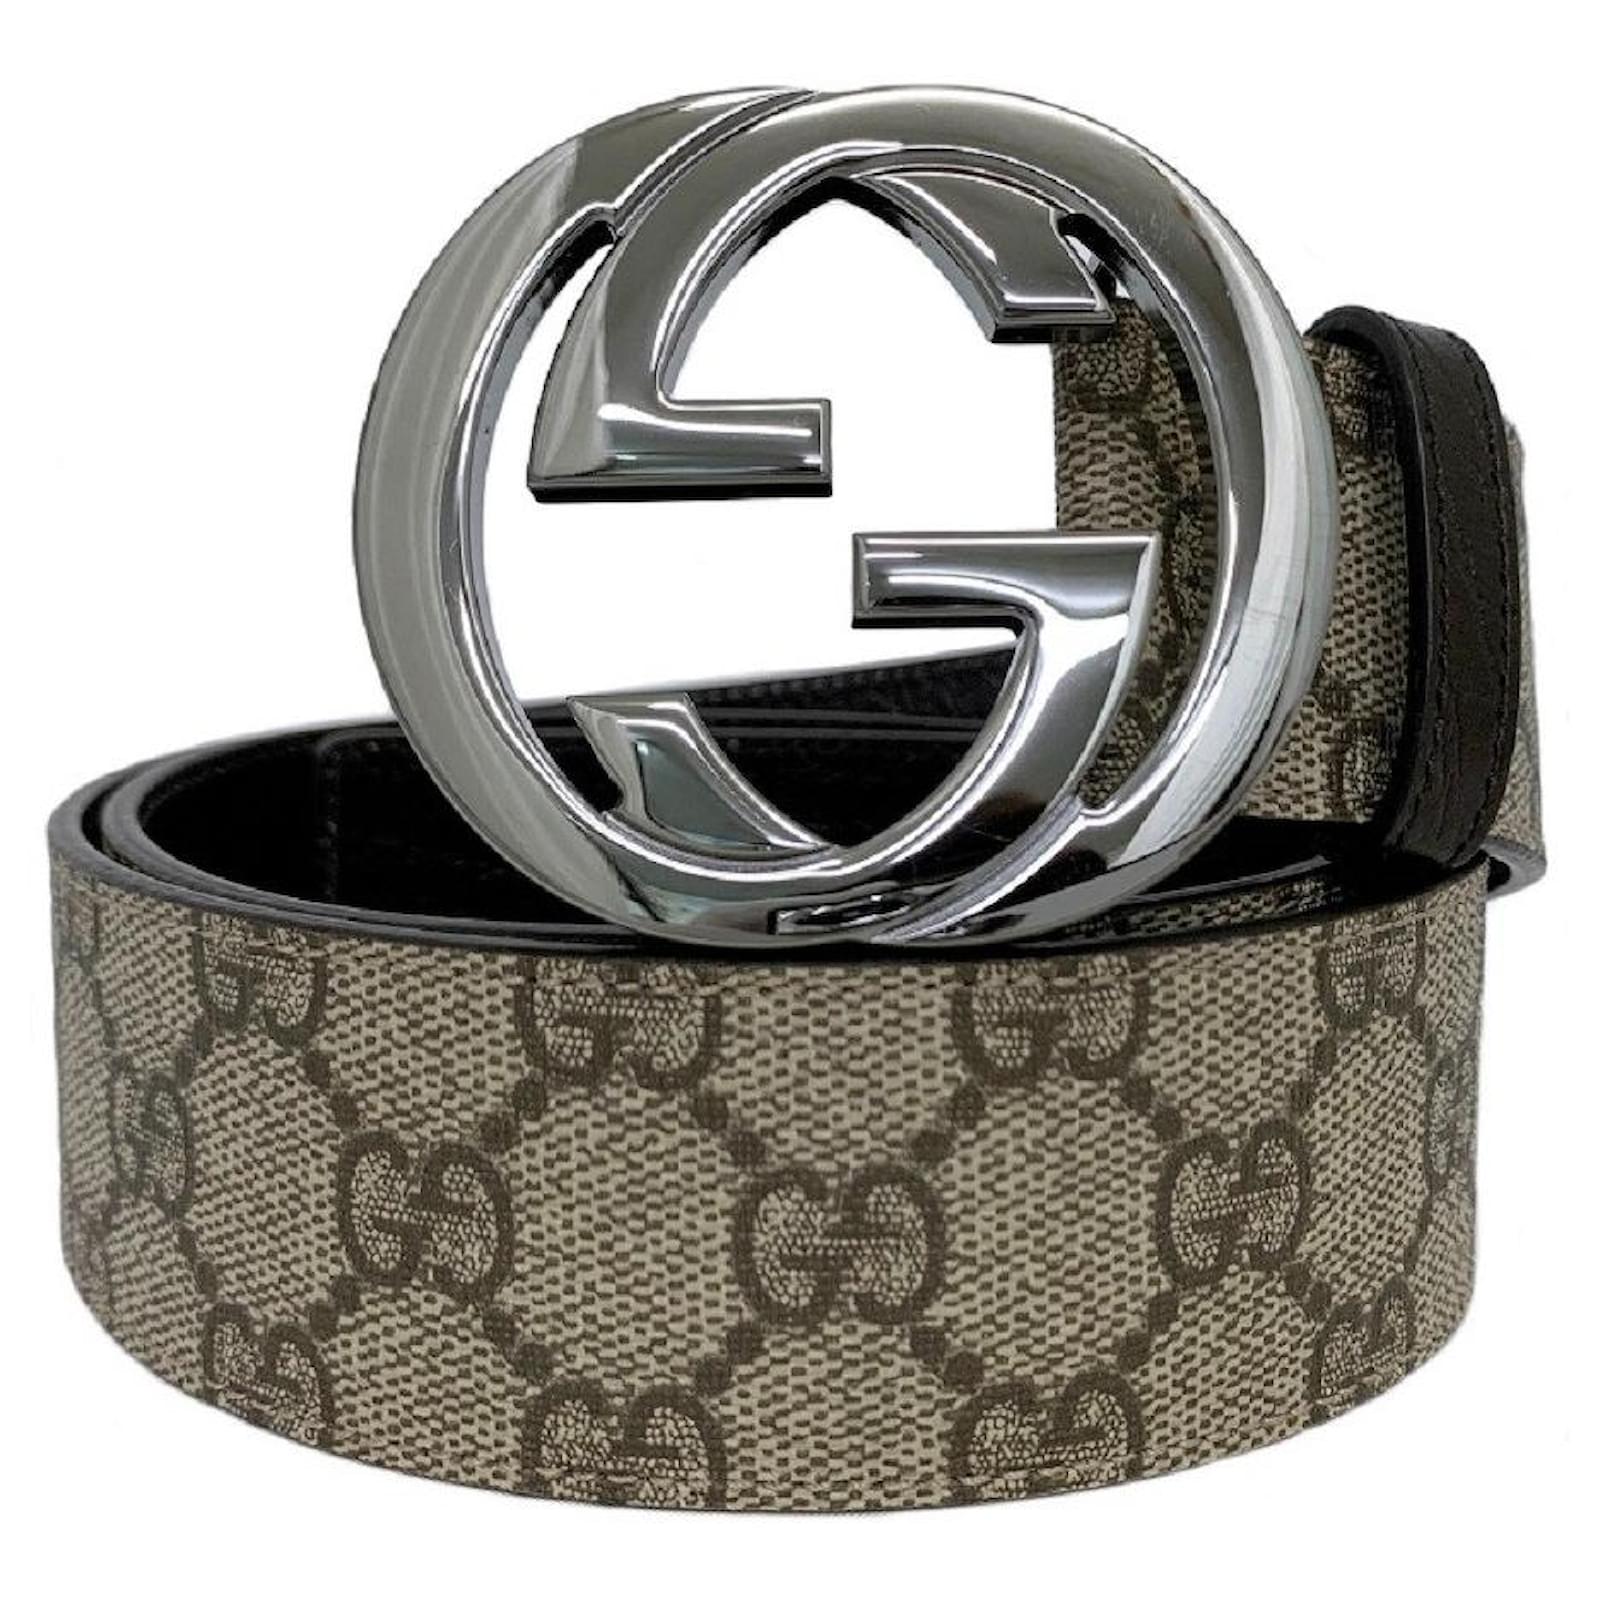 Gucci Cuir Color Silver Buckle GG Belt